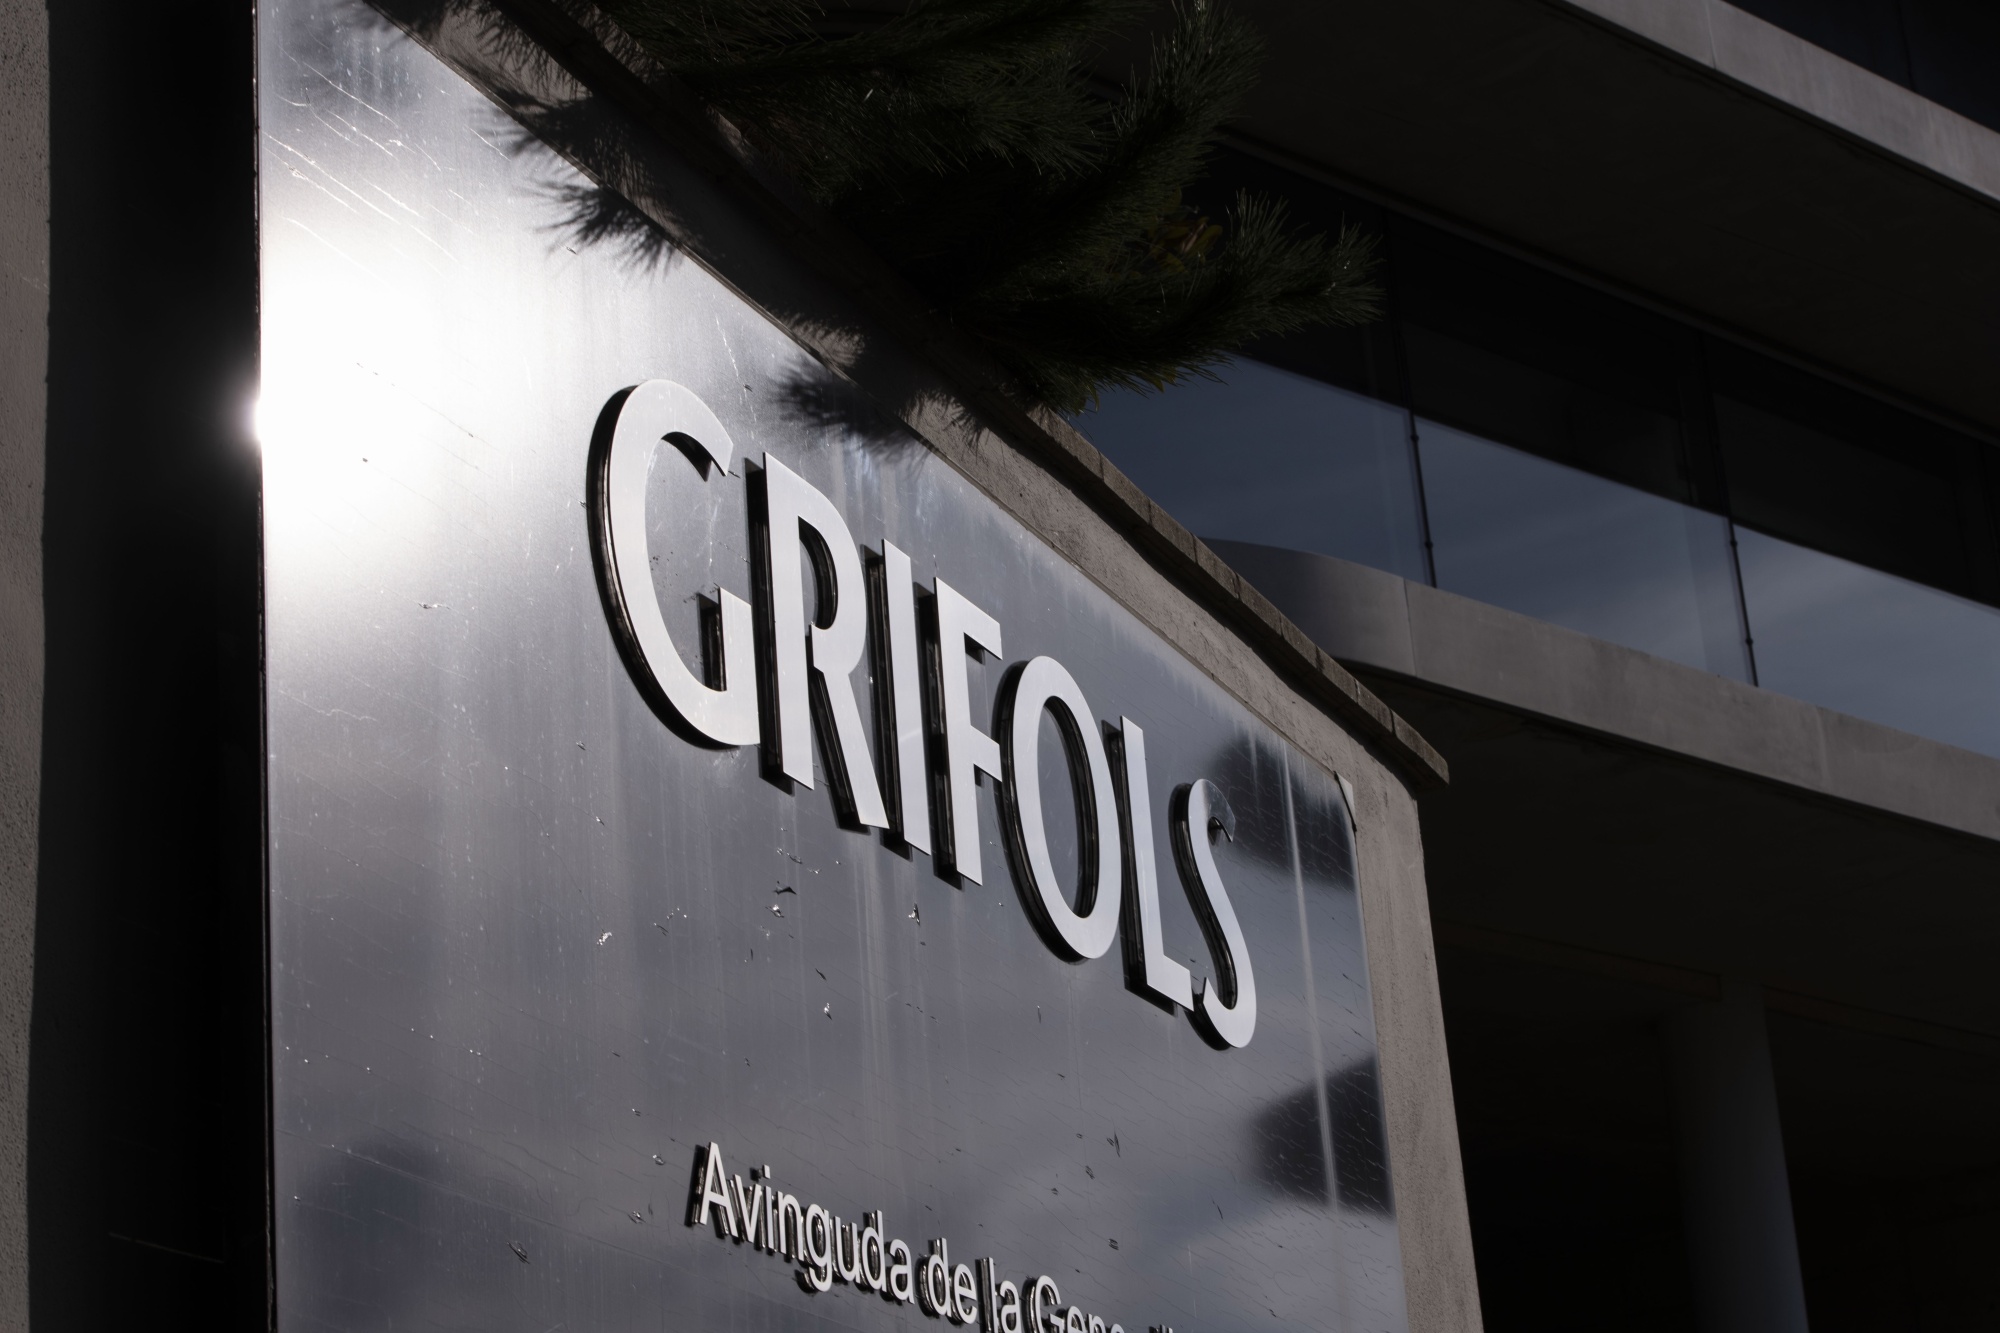 The Grifols headquarters in Barcelona.